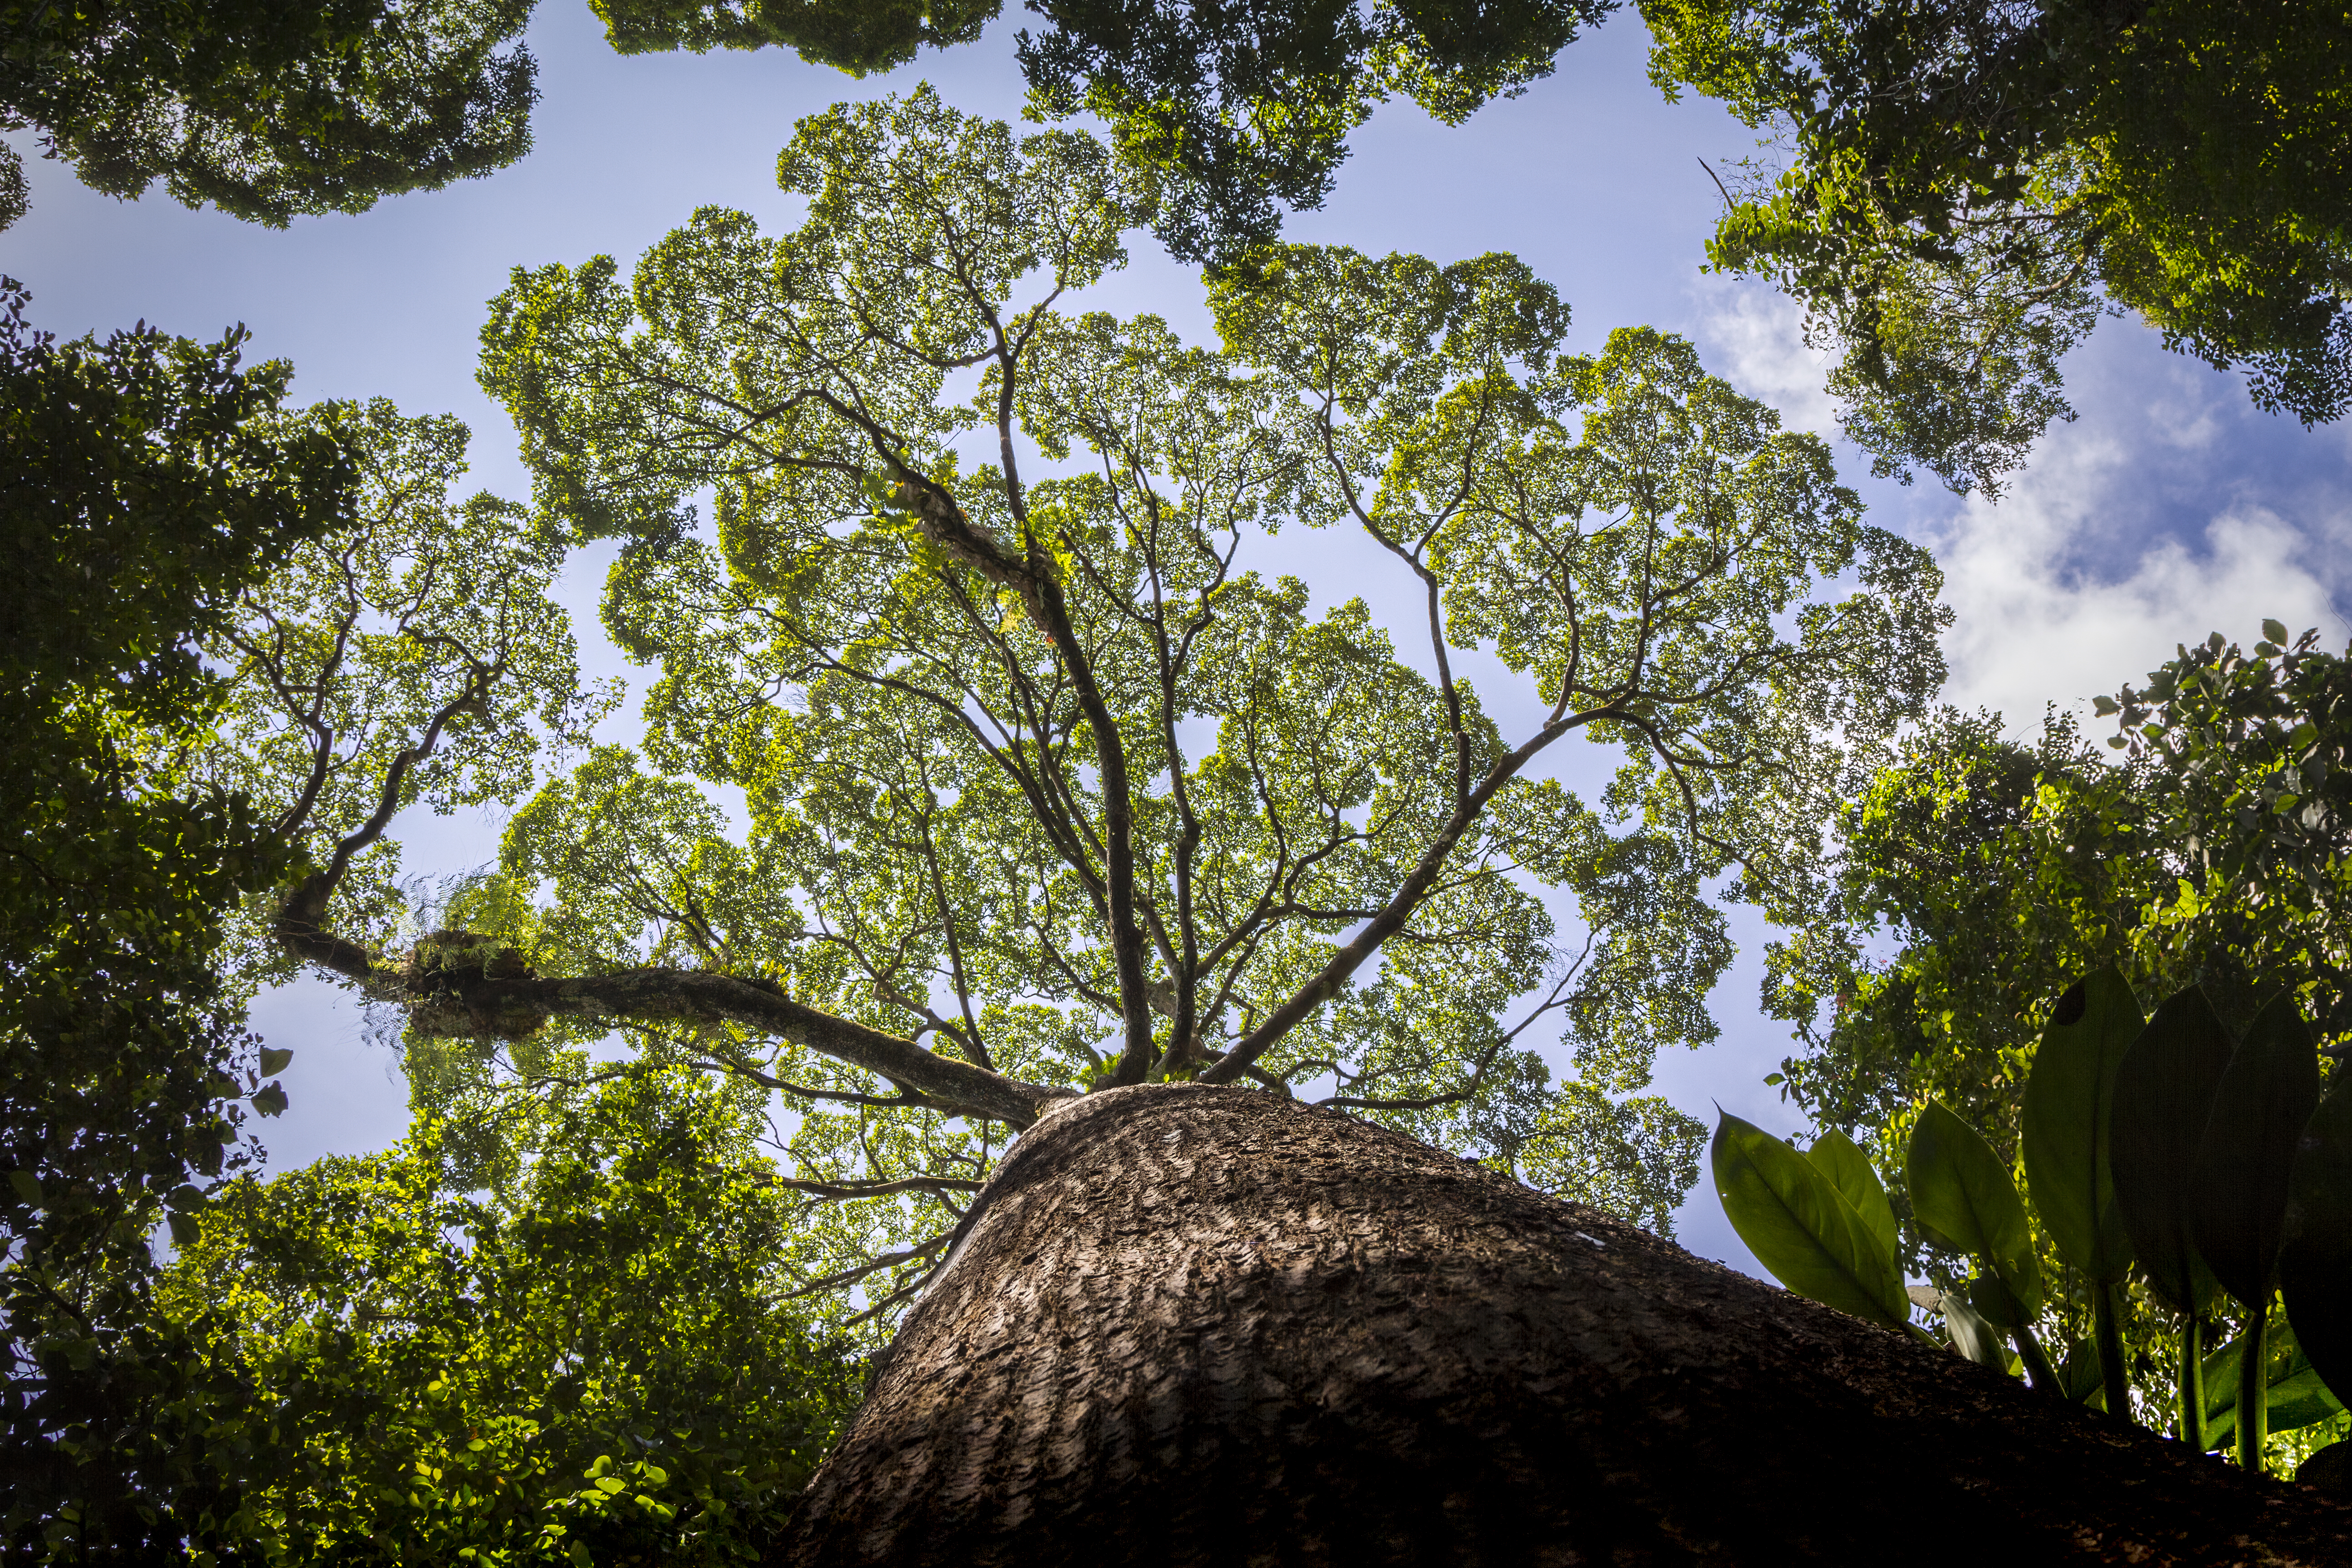 Image of the world's largest rain forest tree